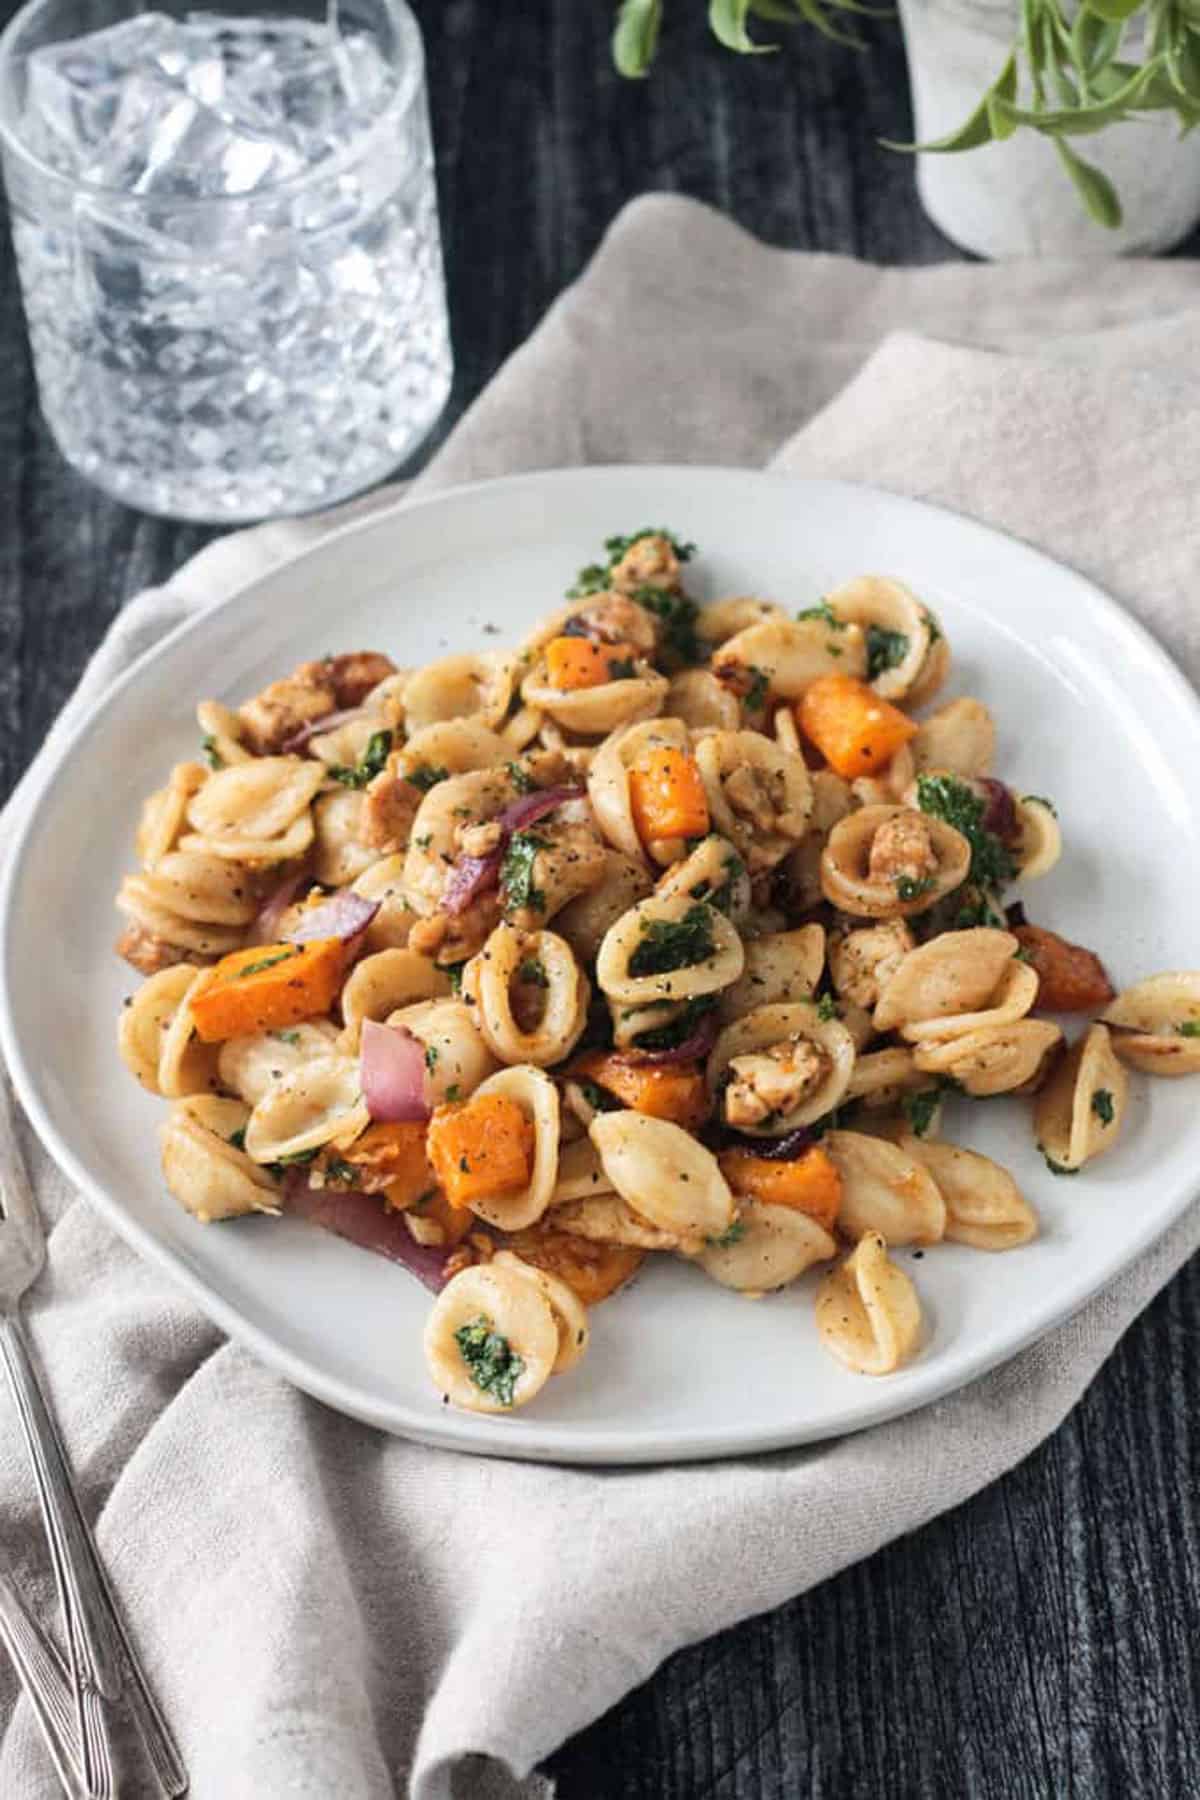 Orecchiette pasta with roasted cubed squash, crumbled tempeh, and kale.